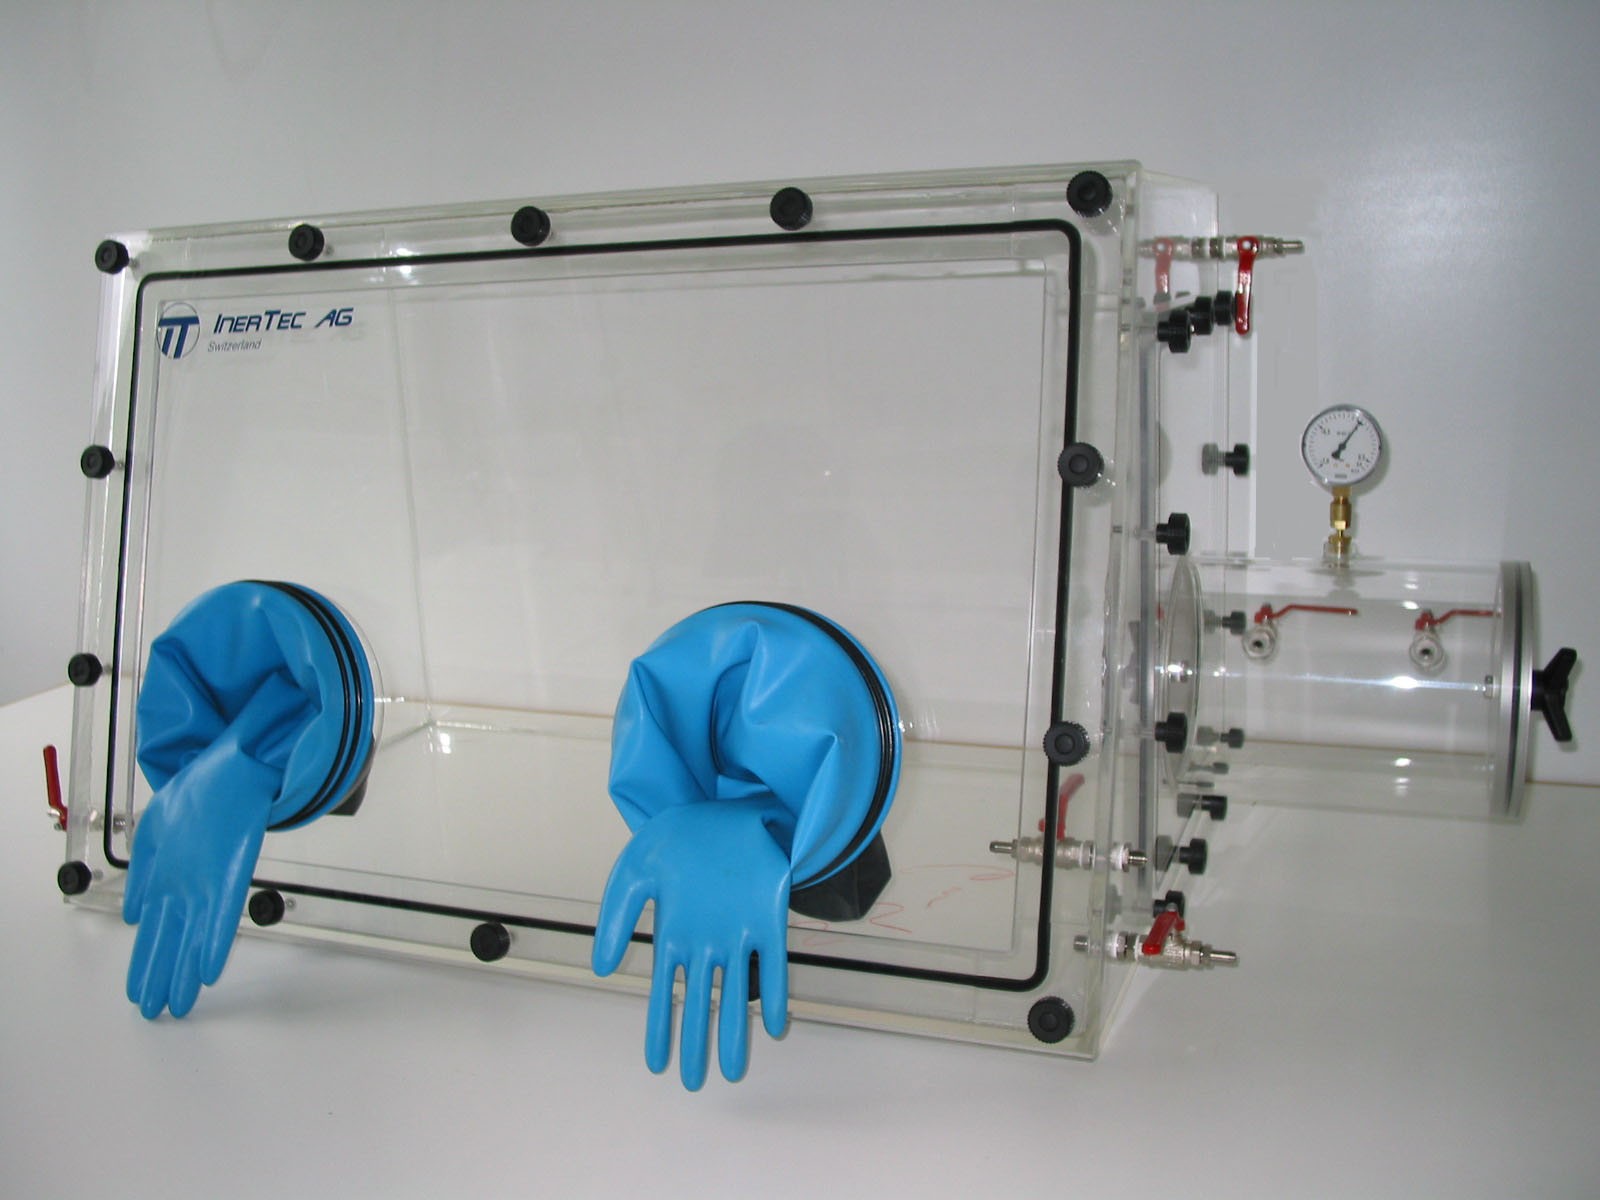 Glovebox made of acrylic&gt; Gas filling: automatic flushing with pressure control, front design: removable, side design: hinged doors, control: oxygen regulator and humidity display with data logger